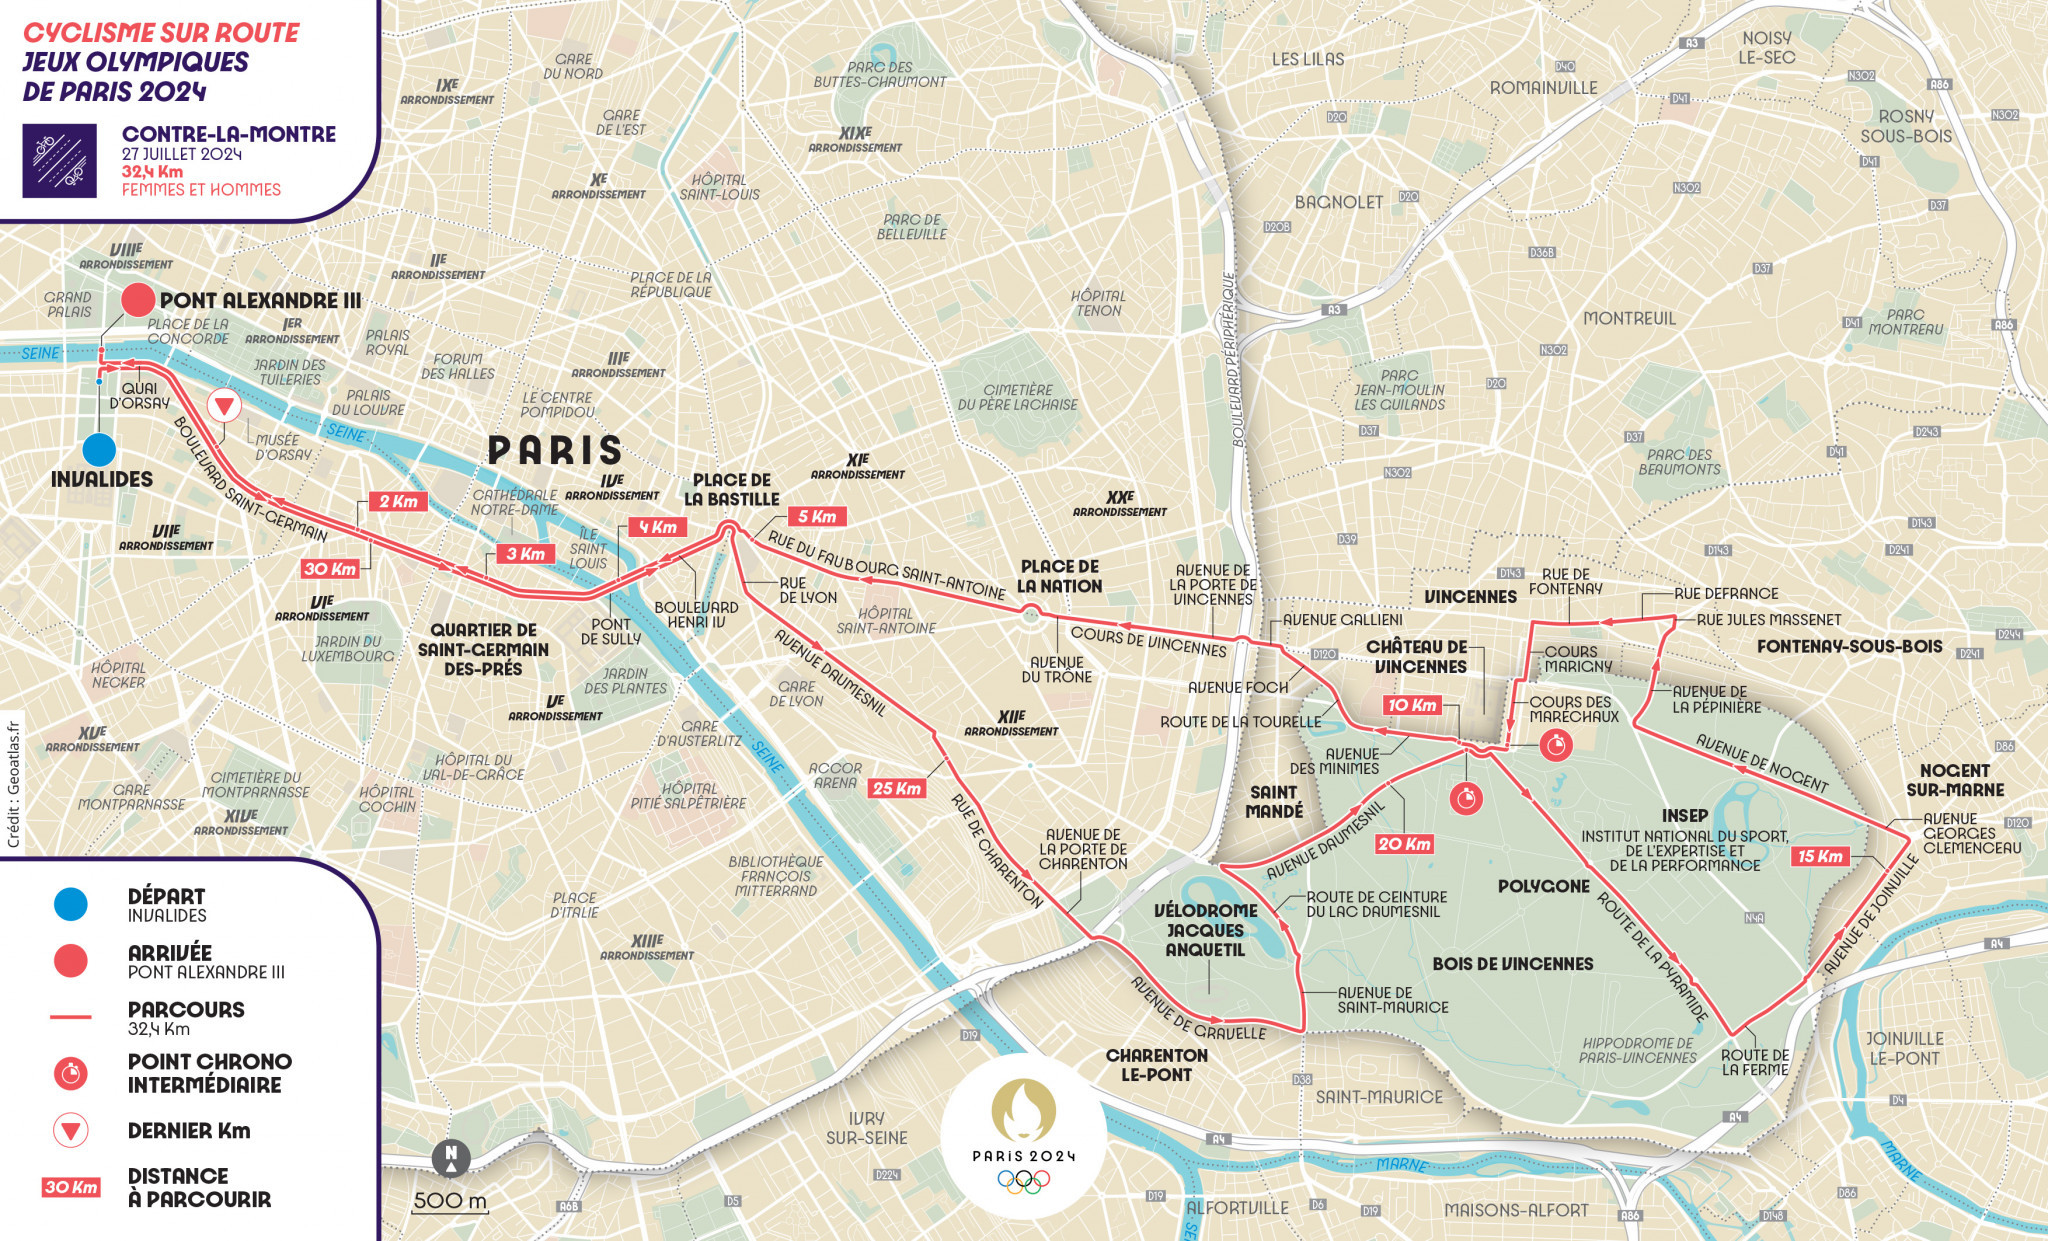 Paris Olympics: all roads lead to French capital in 2024, but Games are  merely part of 12 months of sporting theatre